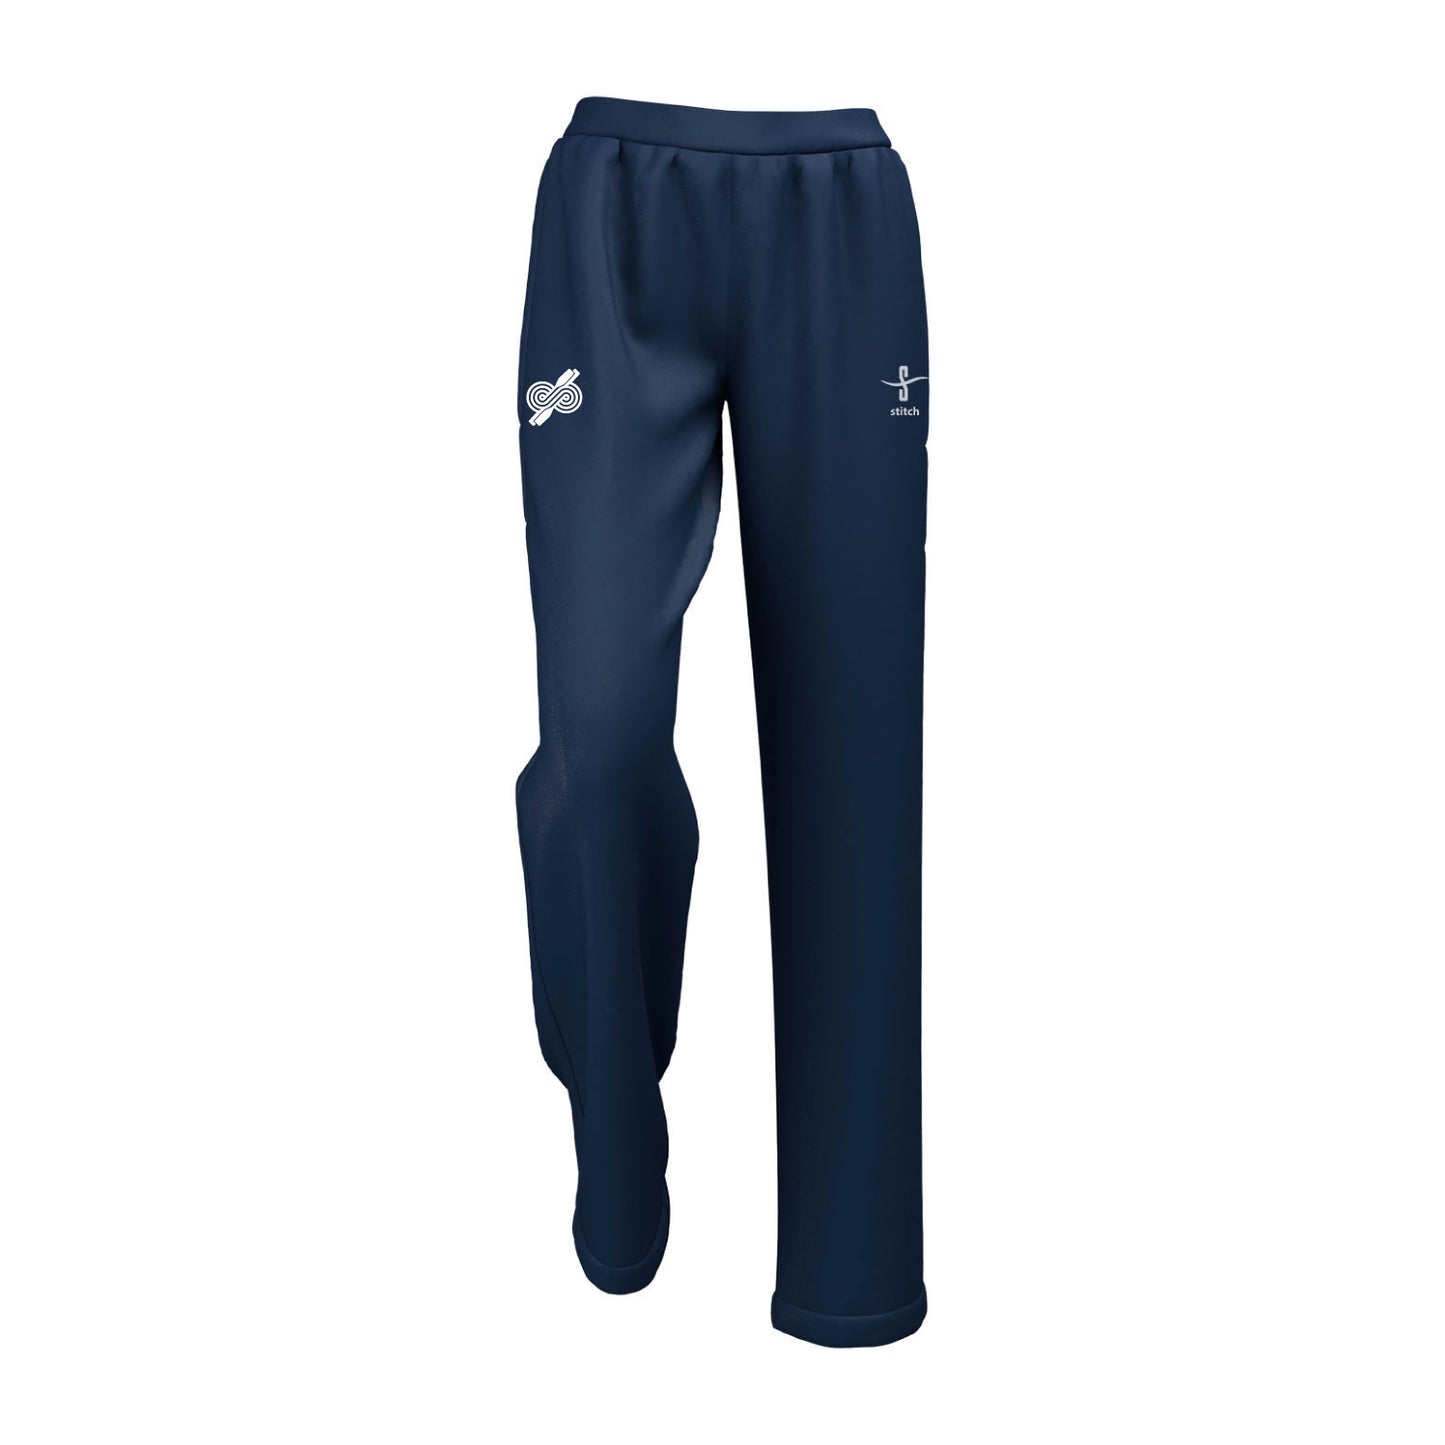 Just Row Gloucestershire Women's Cut Standard Tracksuit Trousers